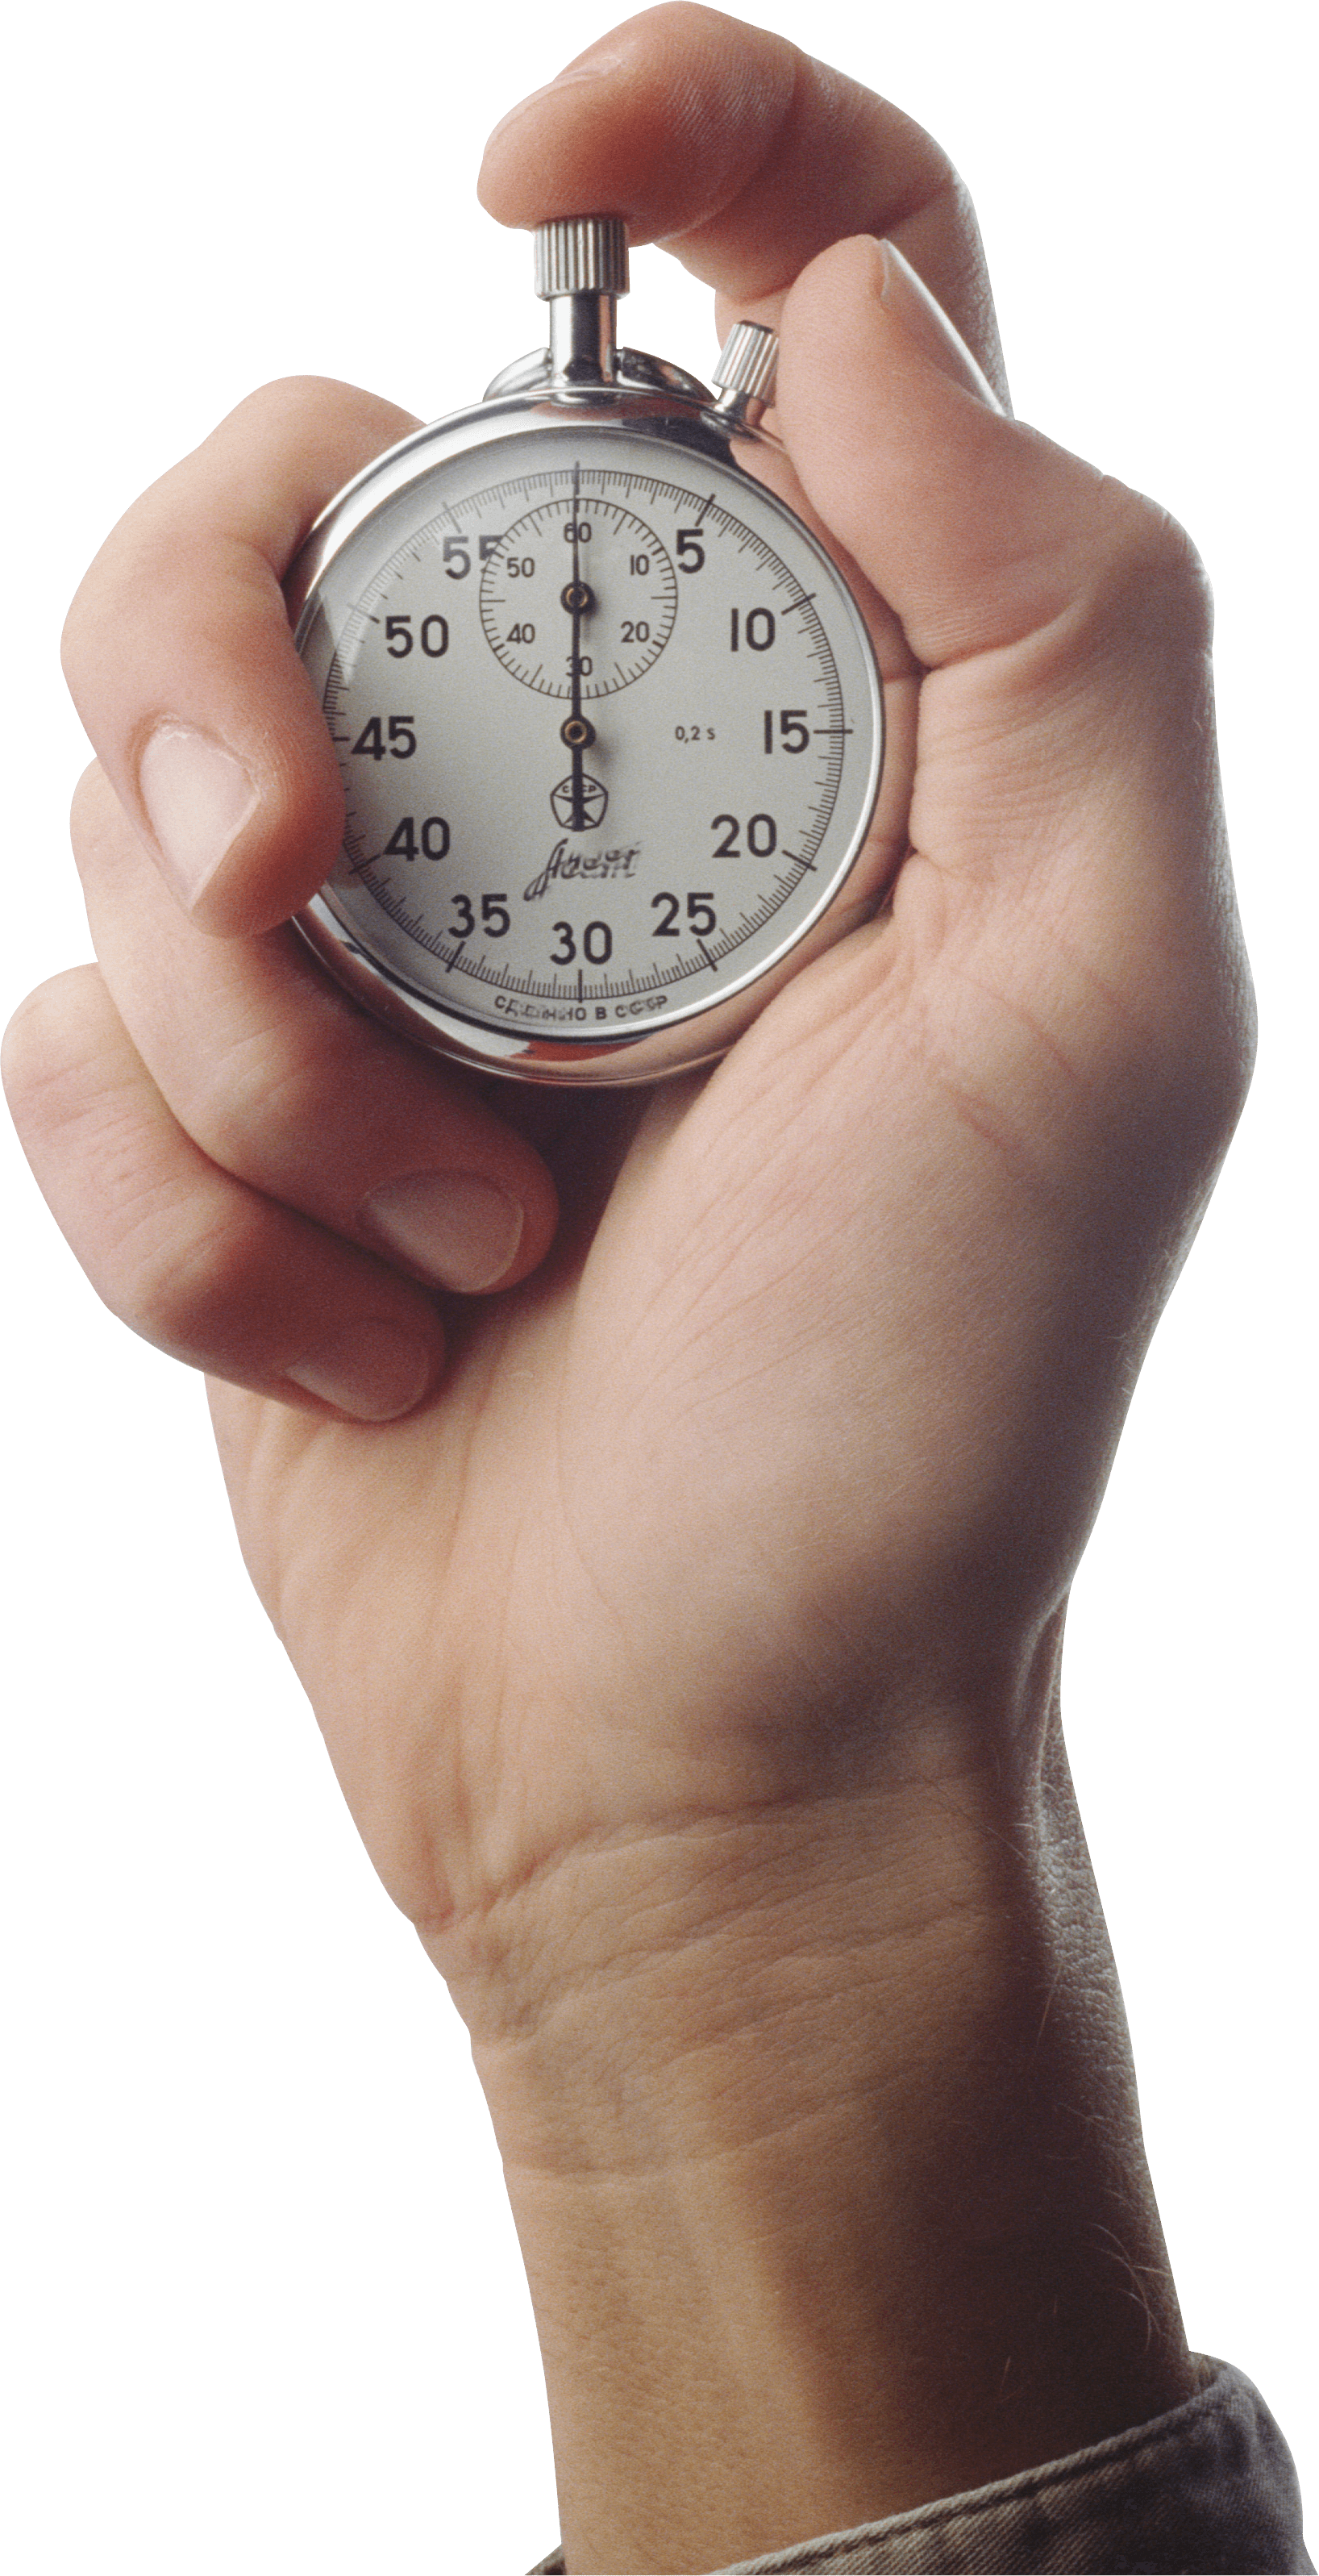 Download Stopwatch In Hand Png Image HQ PNG Image FreePNGImg | vlr.eng.br